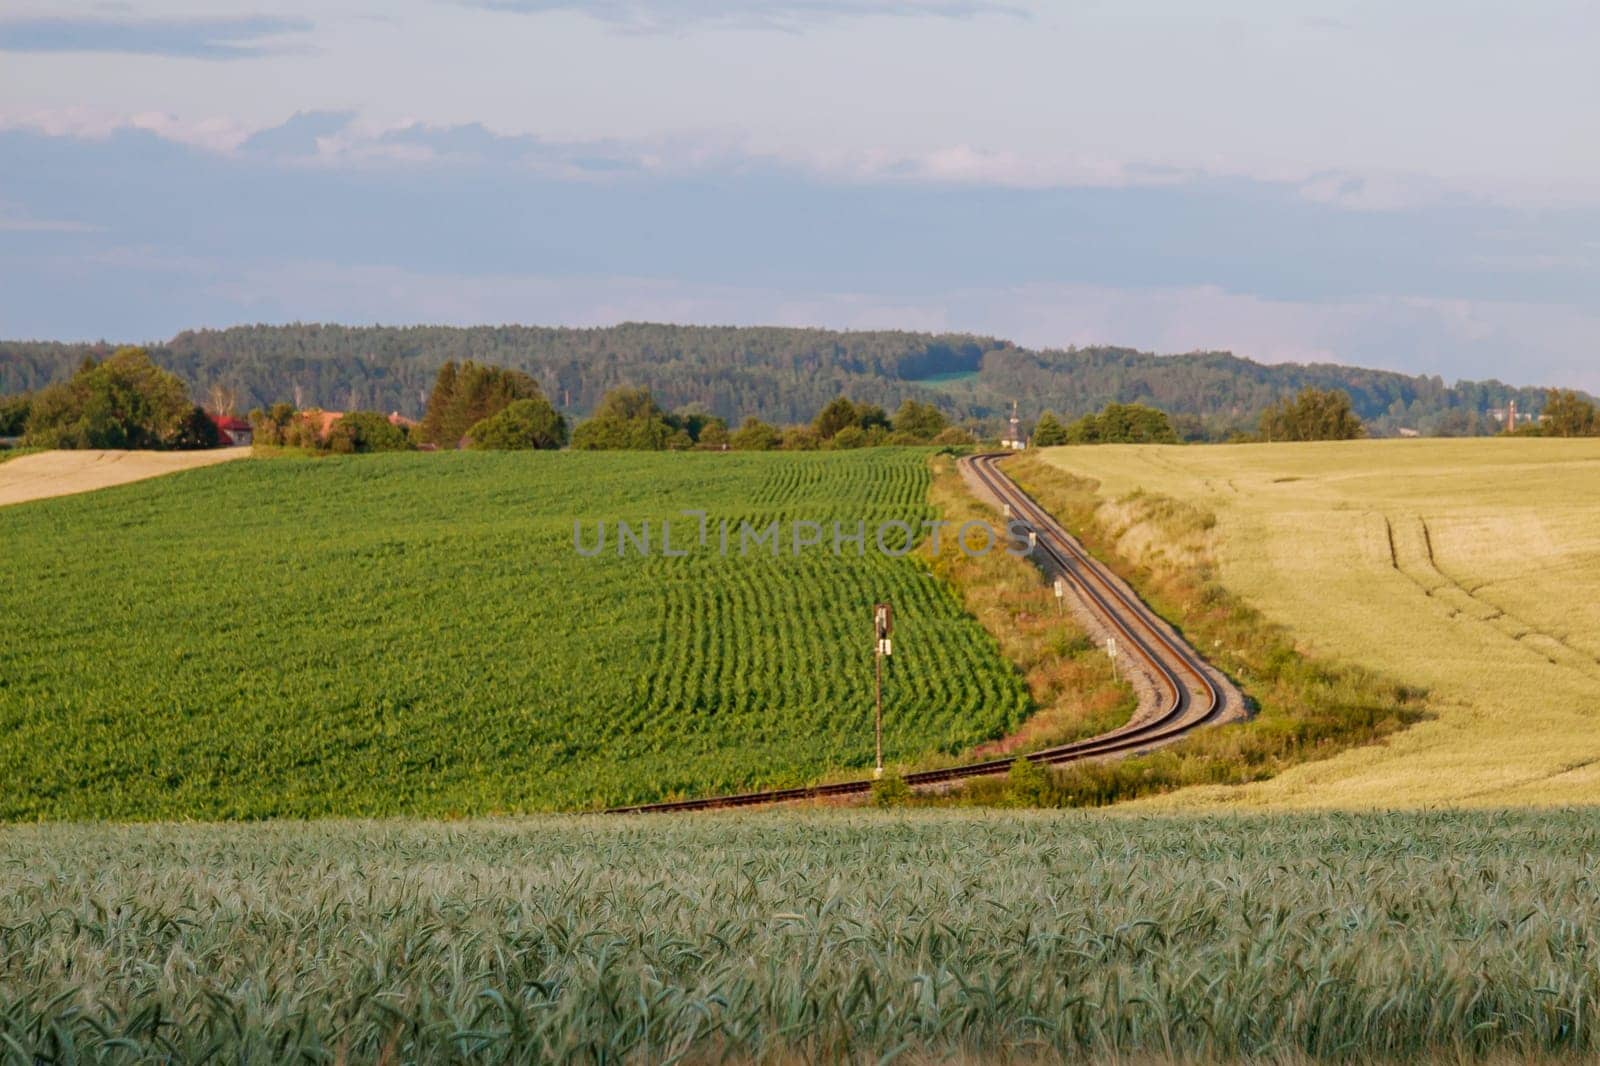 Railway runs alongside green fields, connecting distant towns and cities by Yaroslav